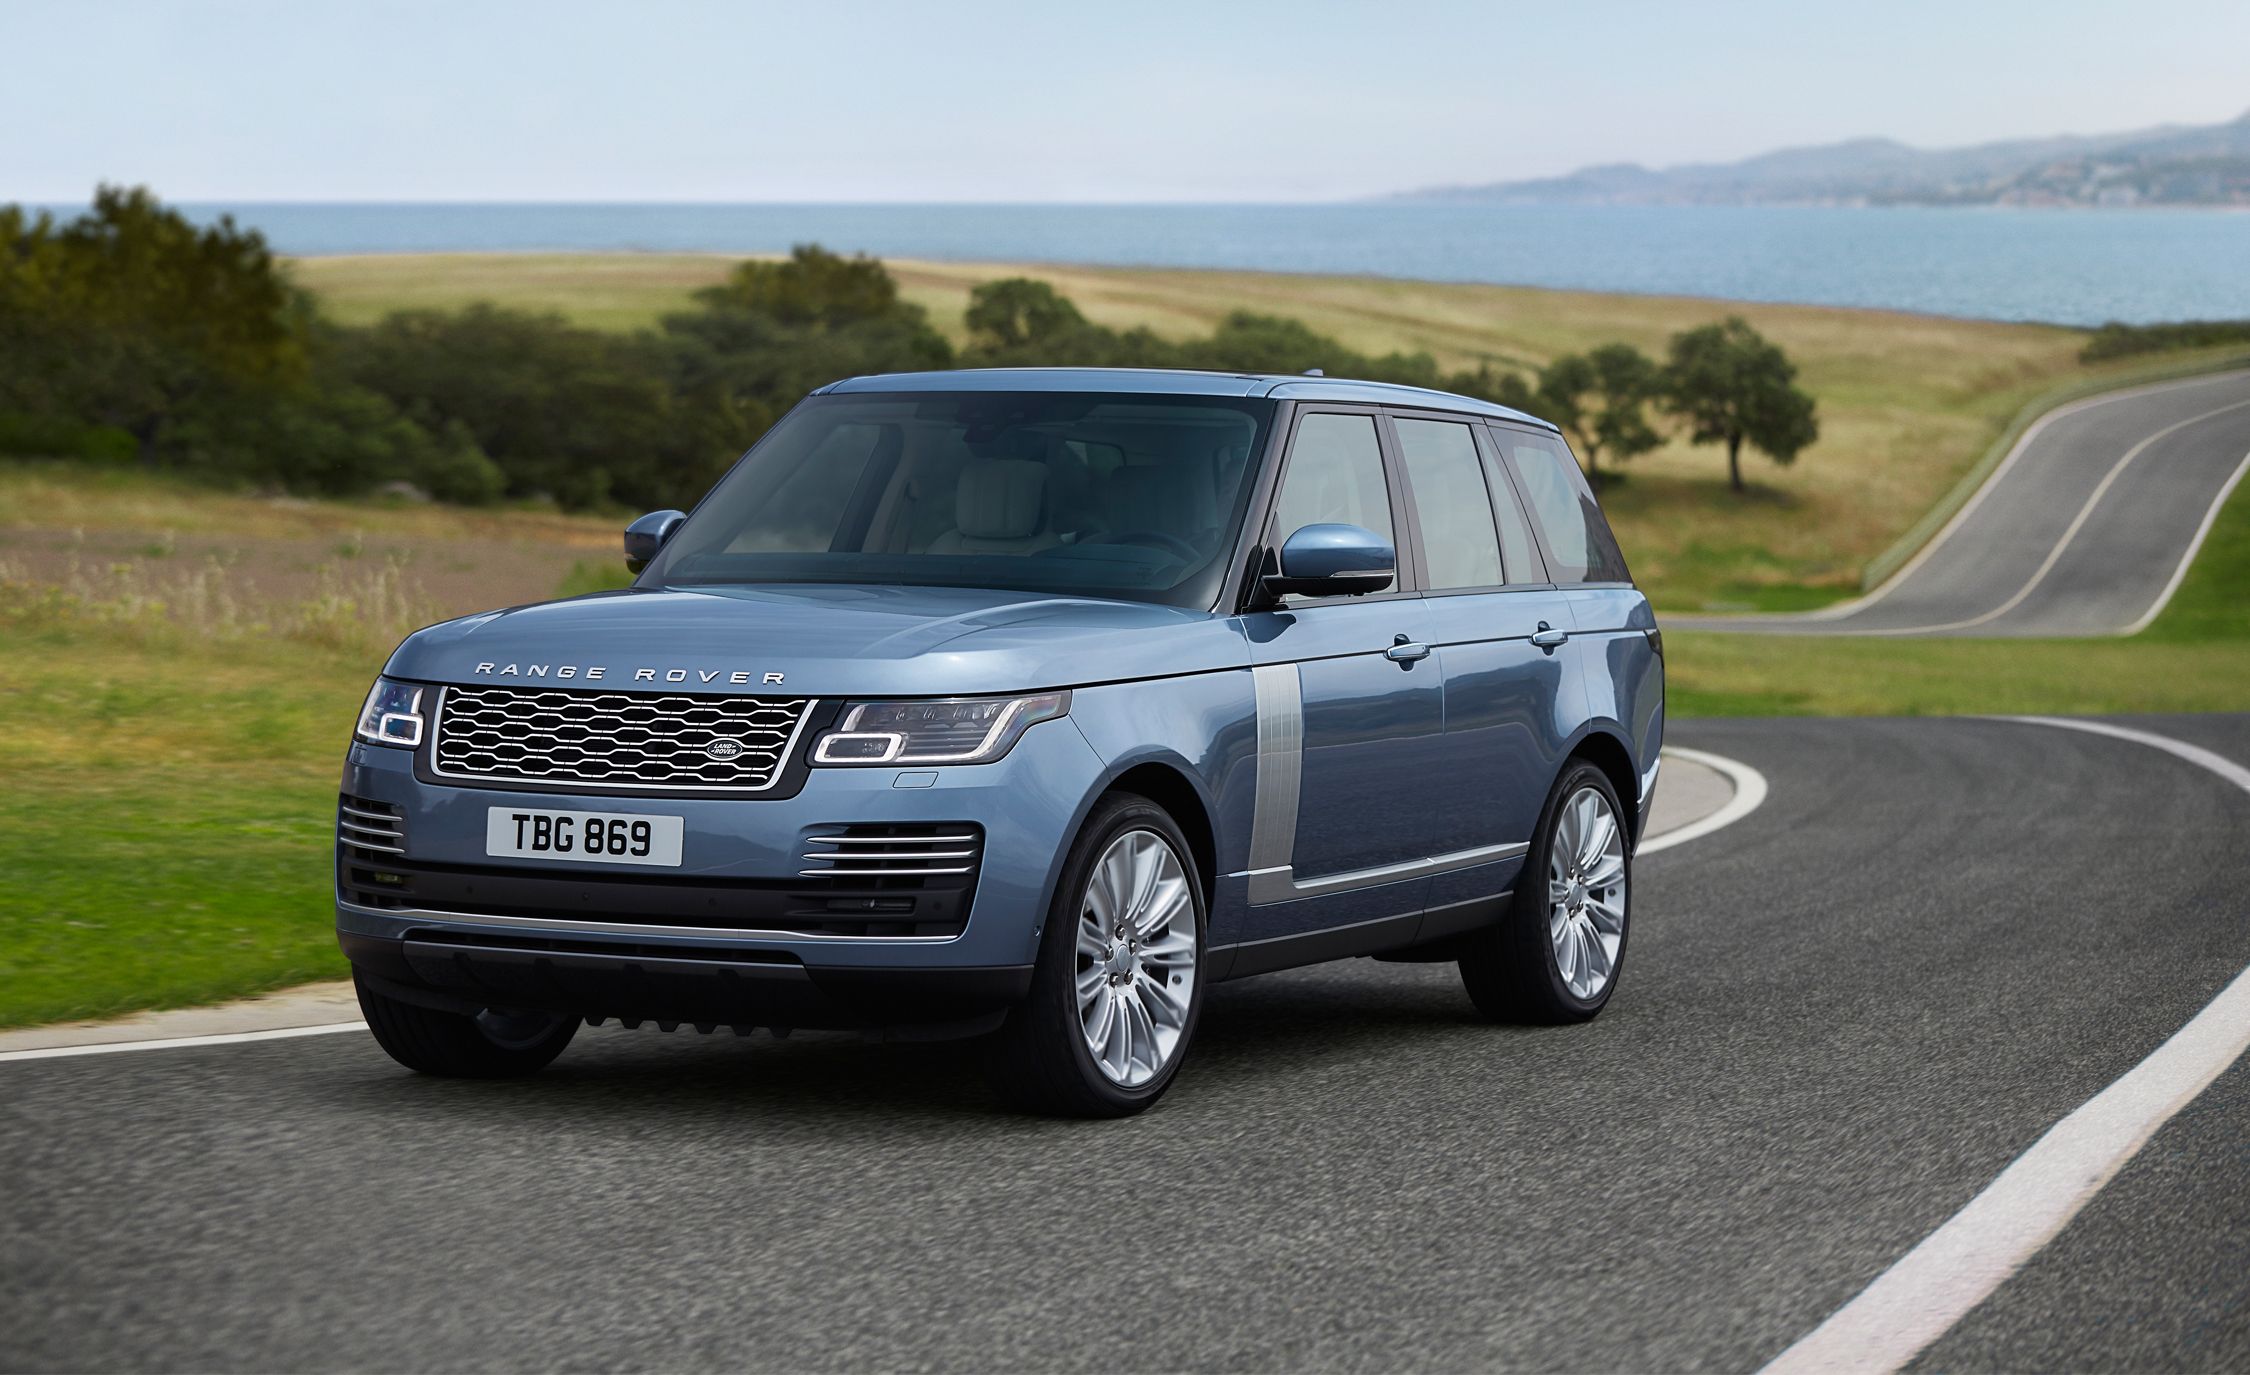 Images Of Range Rover Car  - Polish Your Personal Project Or Design With These Range Rover Transparent Png Images, Make It Even More Personalized And More Attractive.